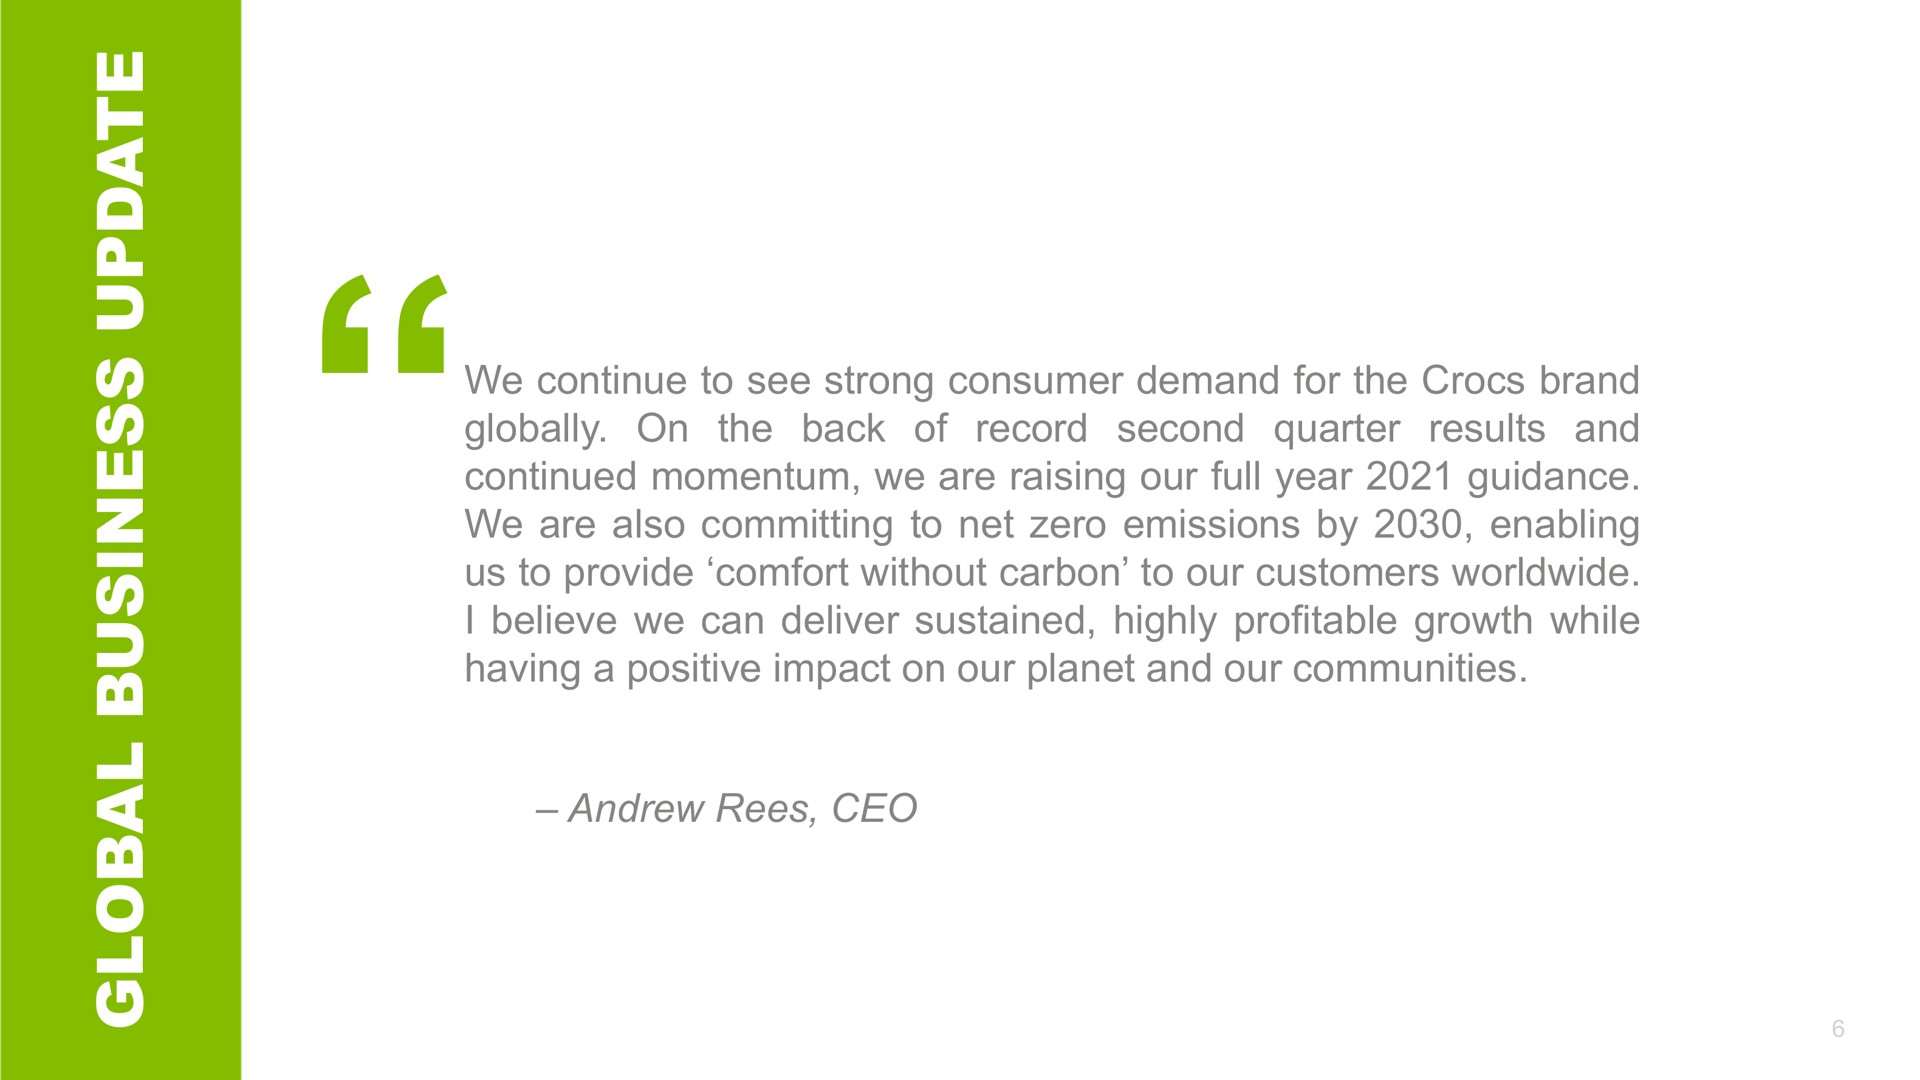 a a record second quarter we continue to see strong consumer demand for the brand results and globally on the back of continued momentum we are raising our full year guidance we are also committing to net zero emissions by enabling us to provide comfort without carbon to our customers i believe we can deliver sustained highly profitable growth while having a positive impact on our planet and our communities | Crocs